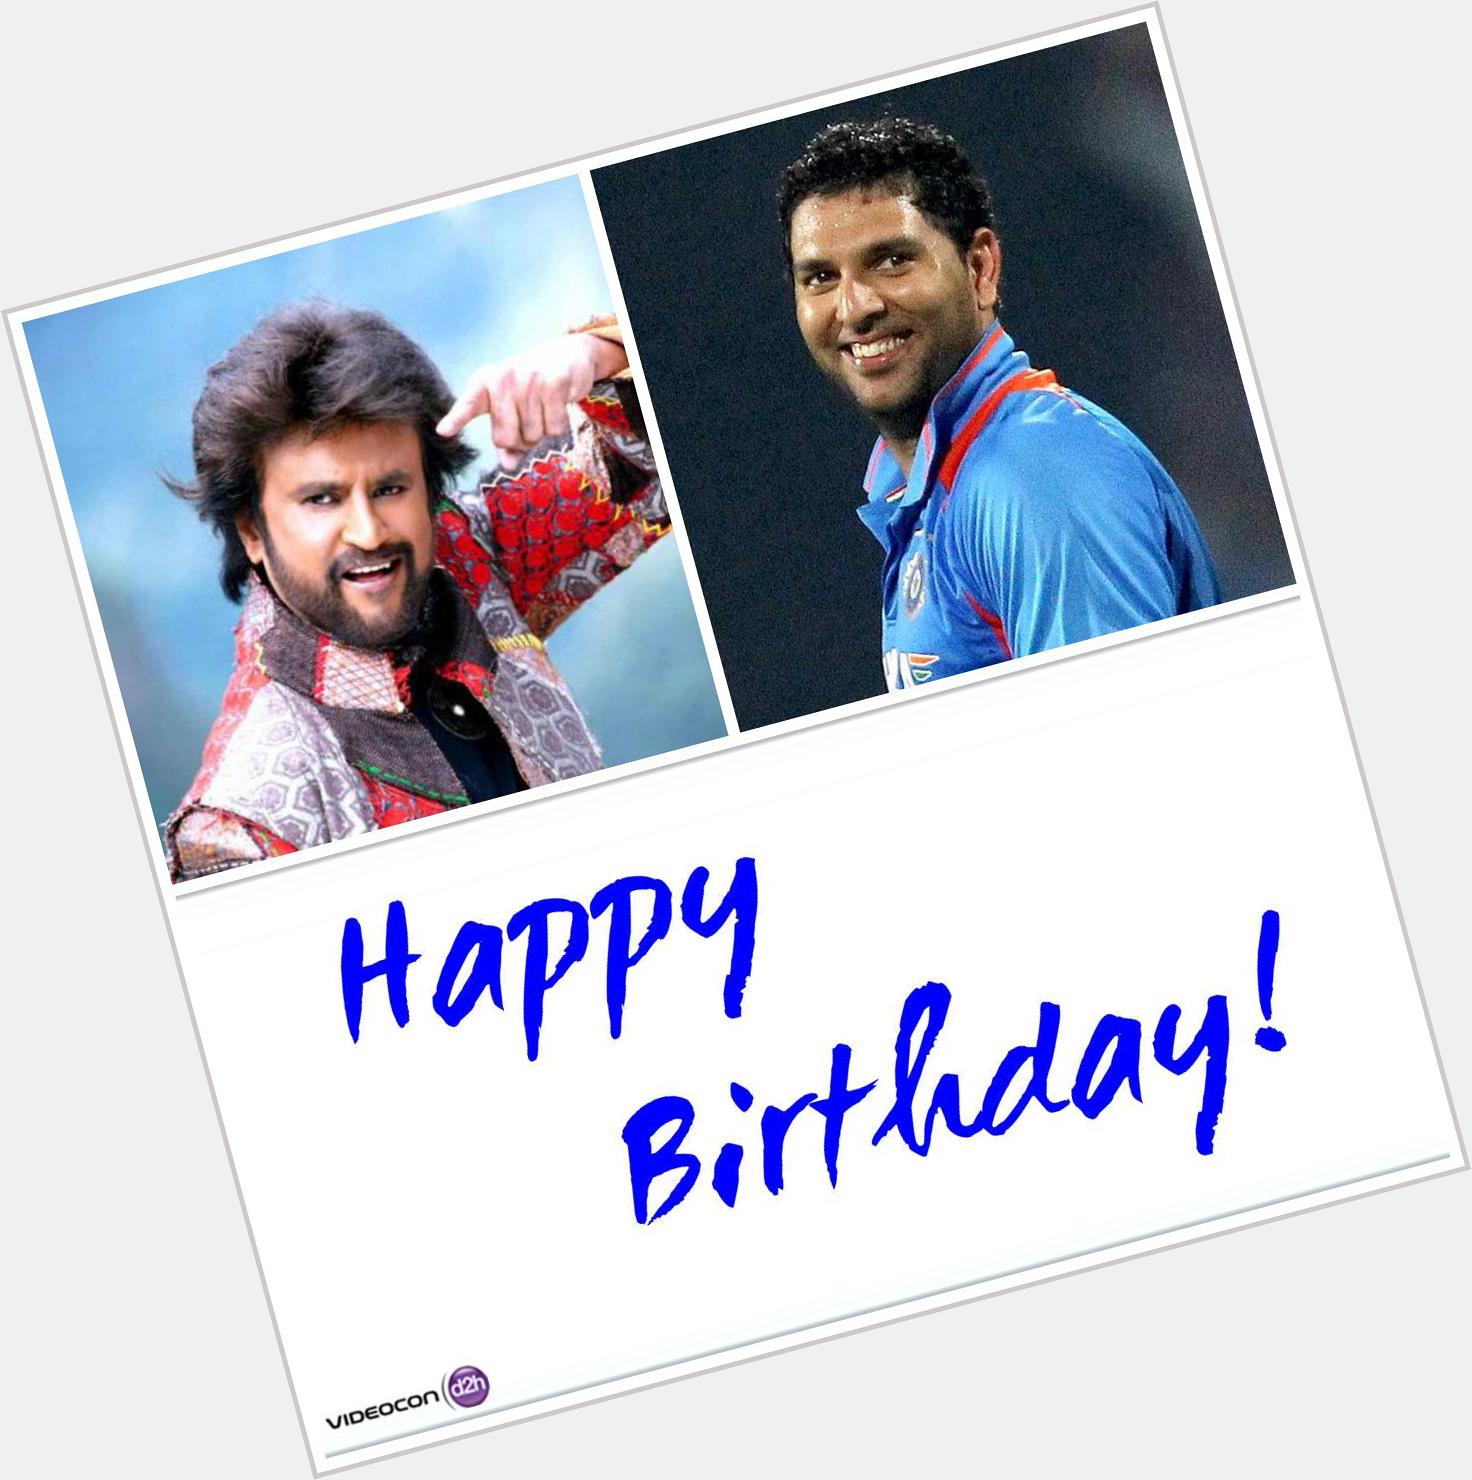 Happy Birthday to Rajinikanth & Yuvraj Singh!
Join us in wishing two of our biggest heroes a brilliant year ahead. 